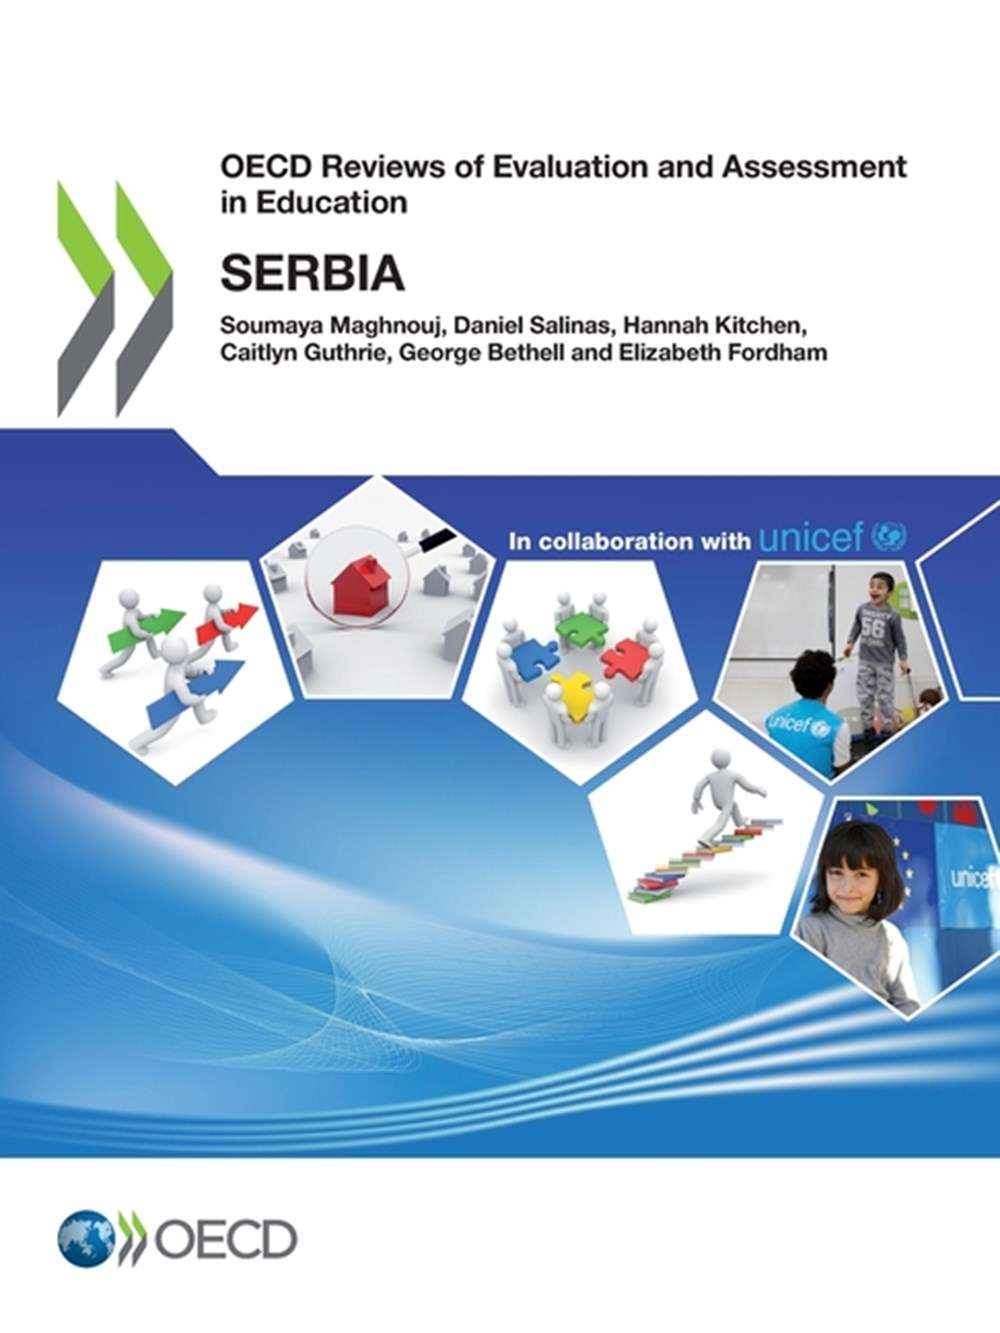 OECD Reviews of Evaluation and Assessment in Education: Serbia